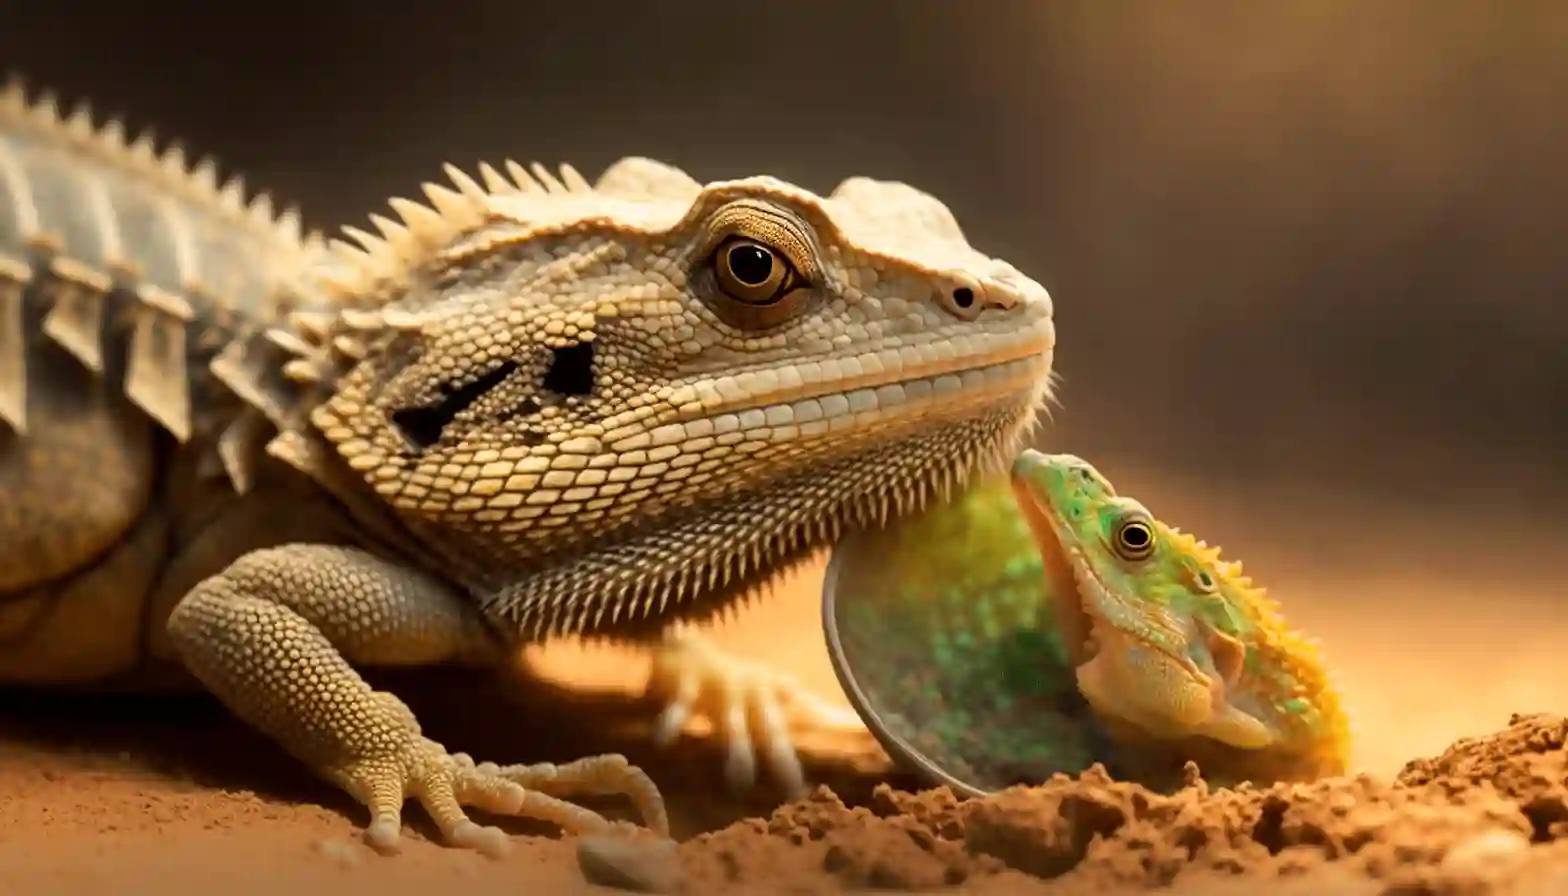 Can Bearded Dragons Eat June Bugs?